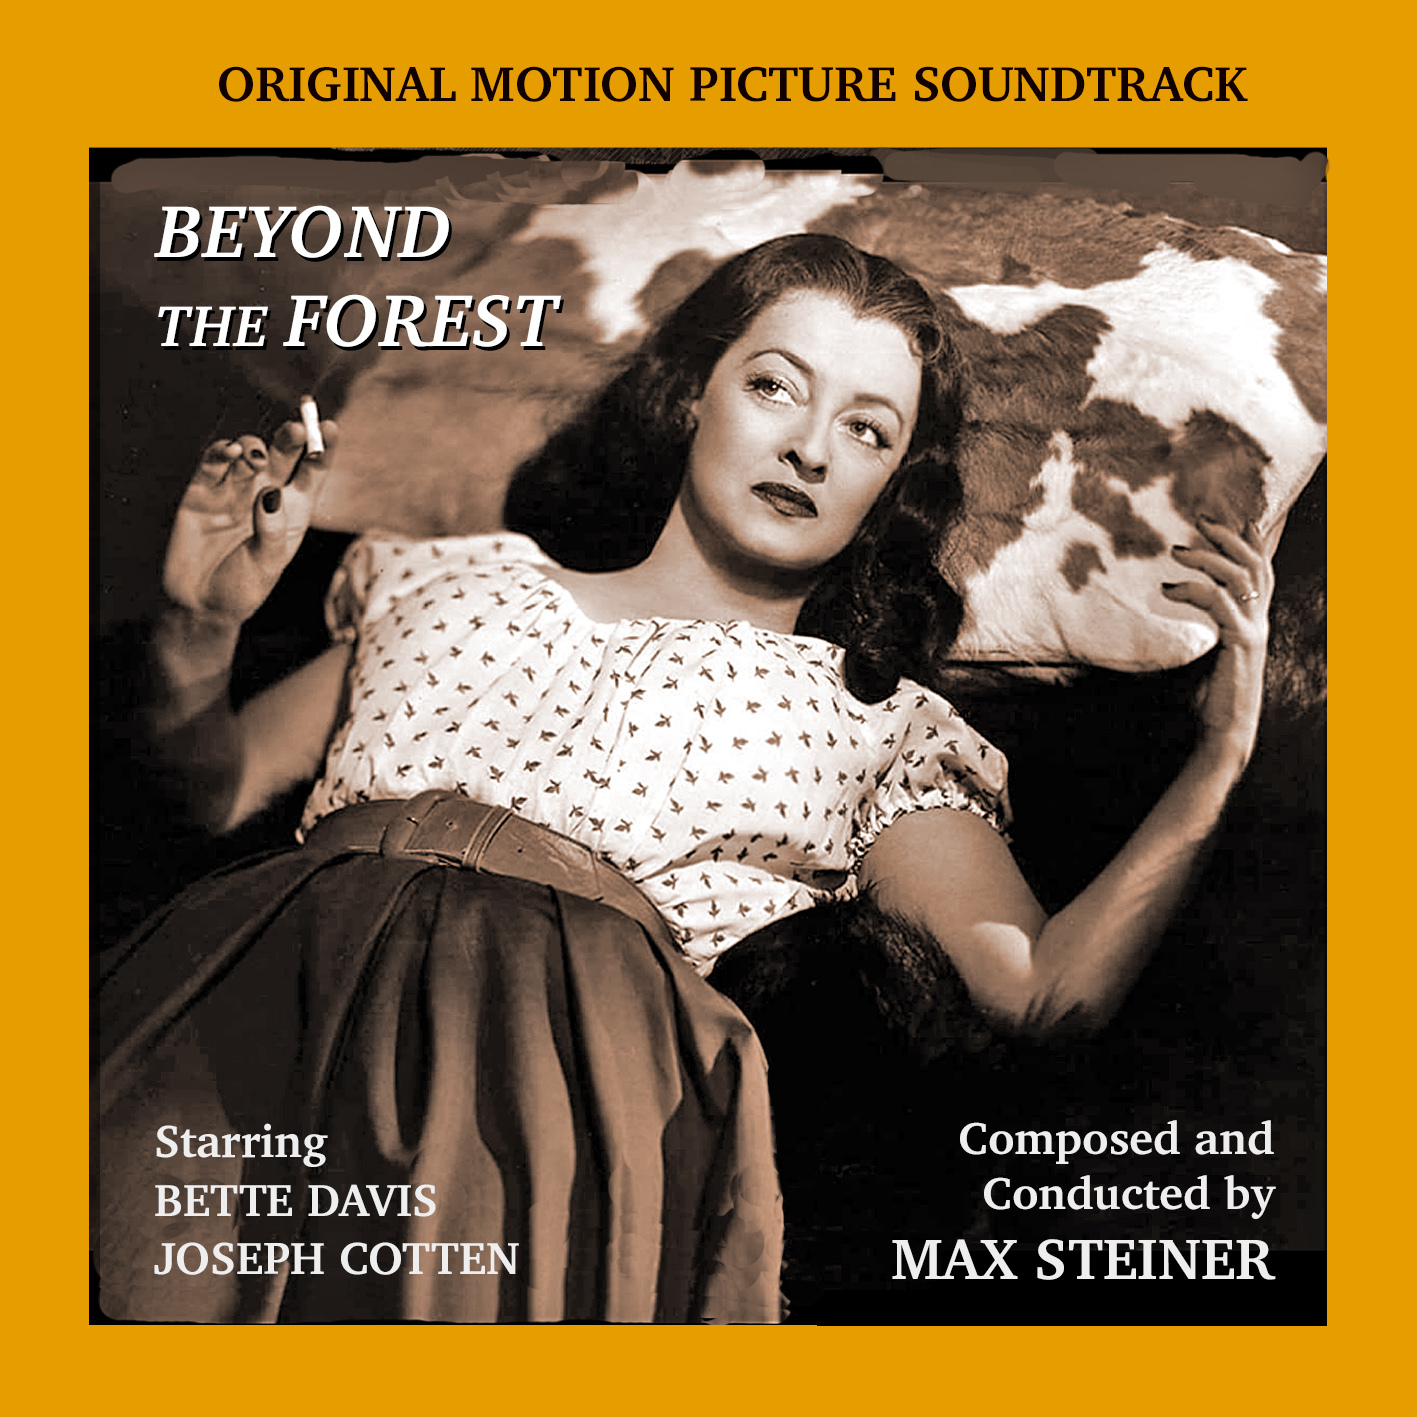 Beyond the Forest by Max Steiner